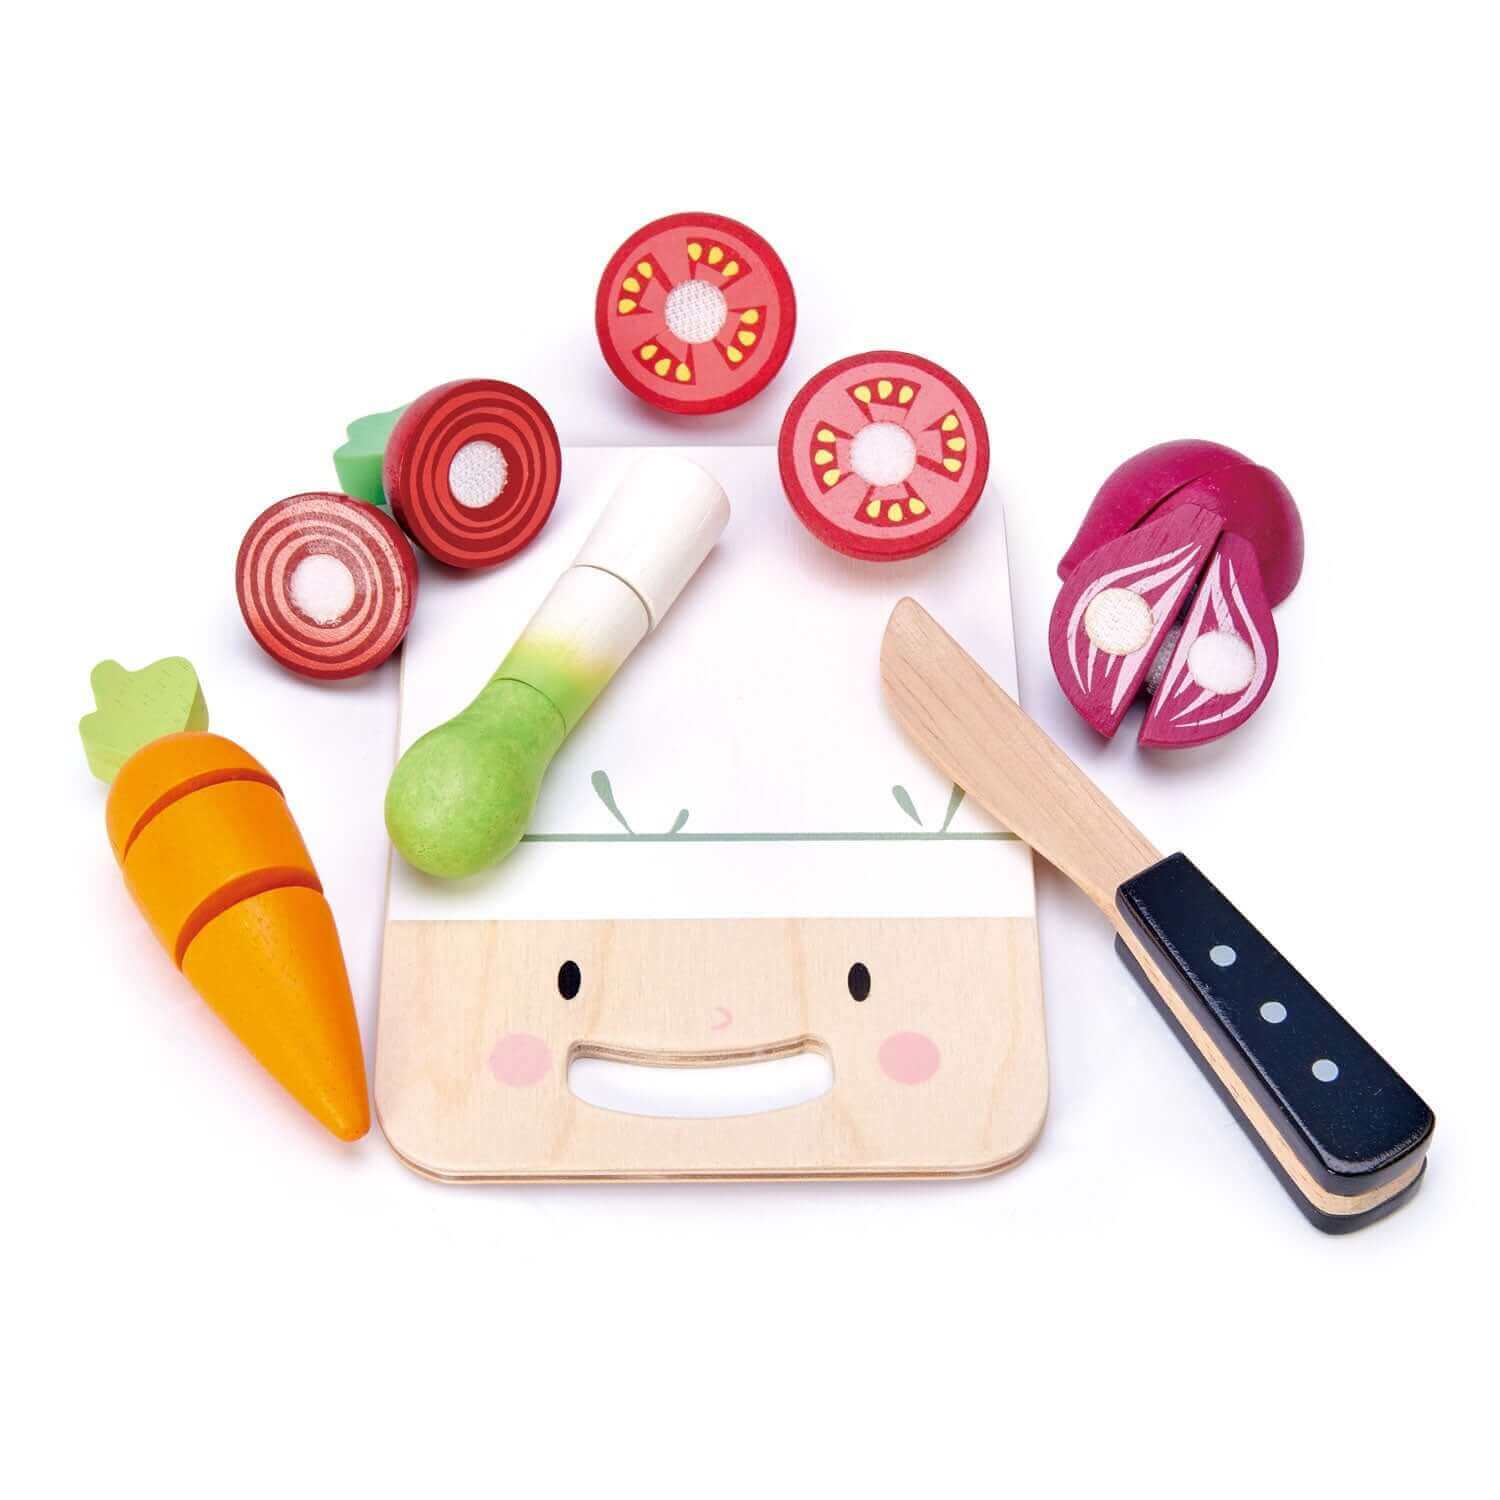 Chef Cutting Board, Tender Leaf Toys, eco-friendly Toys, Mountain Kids Toys